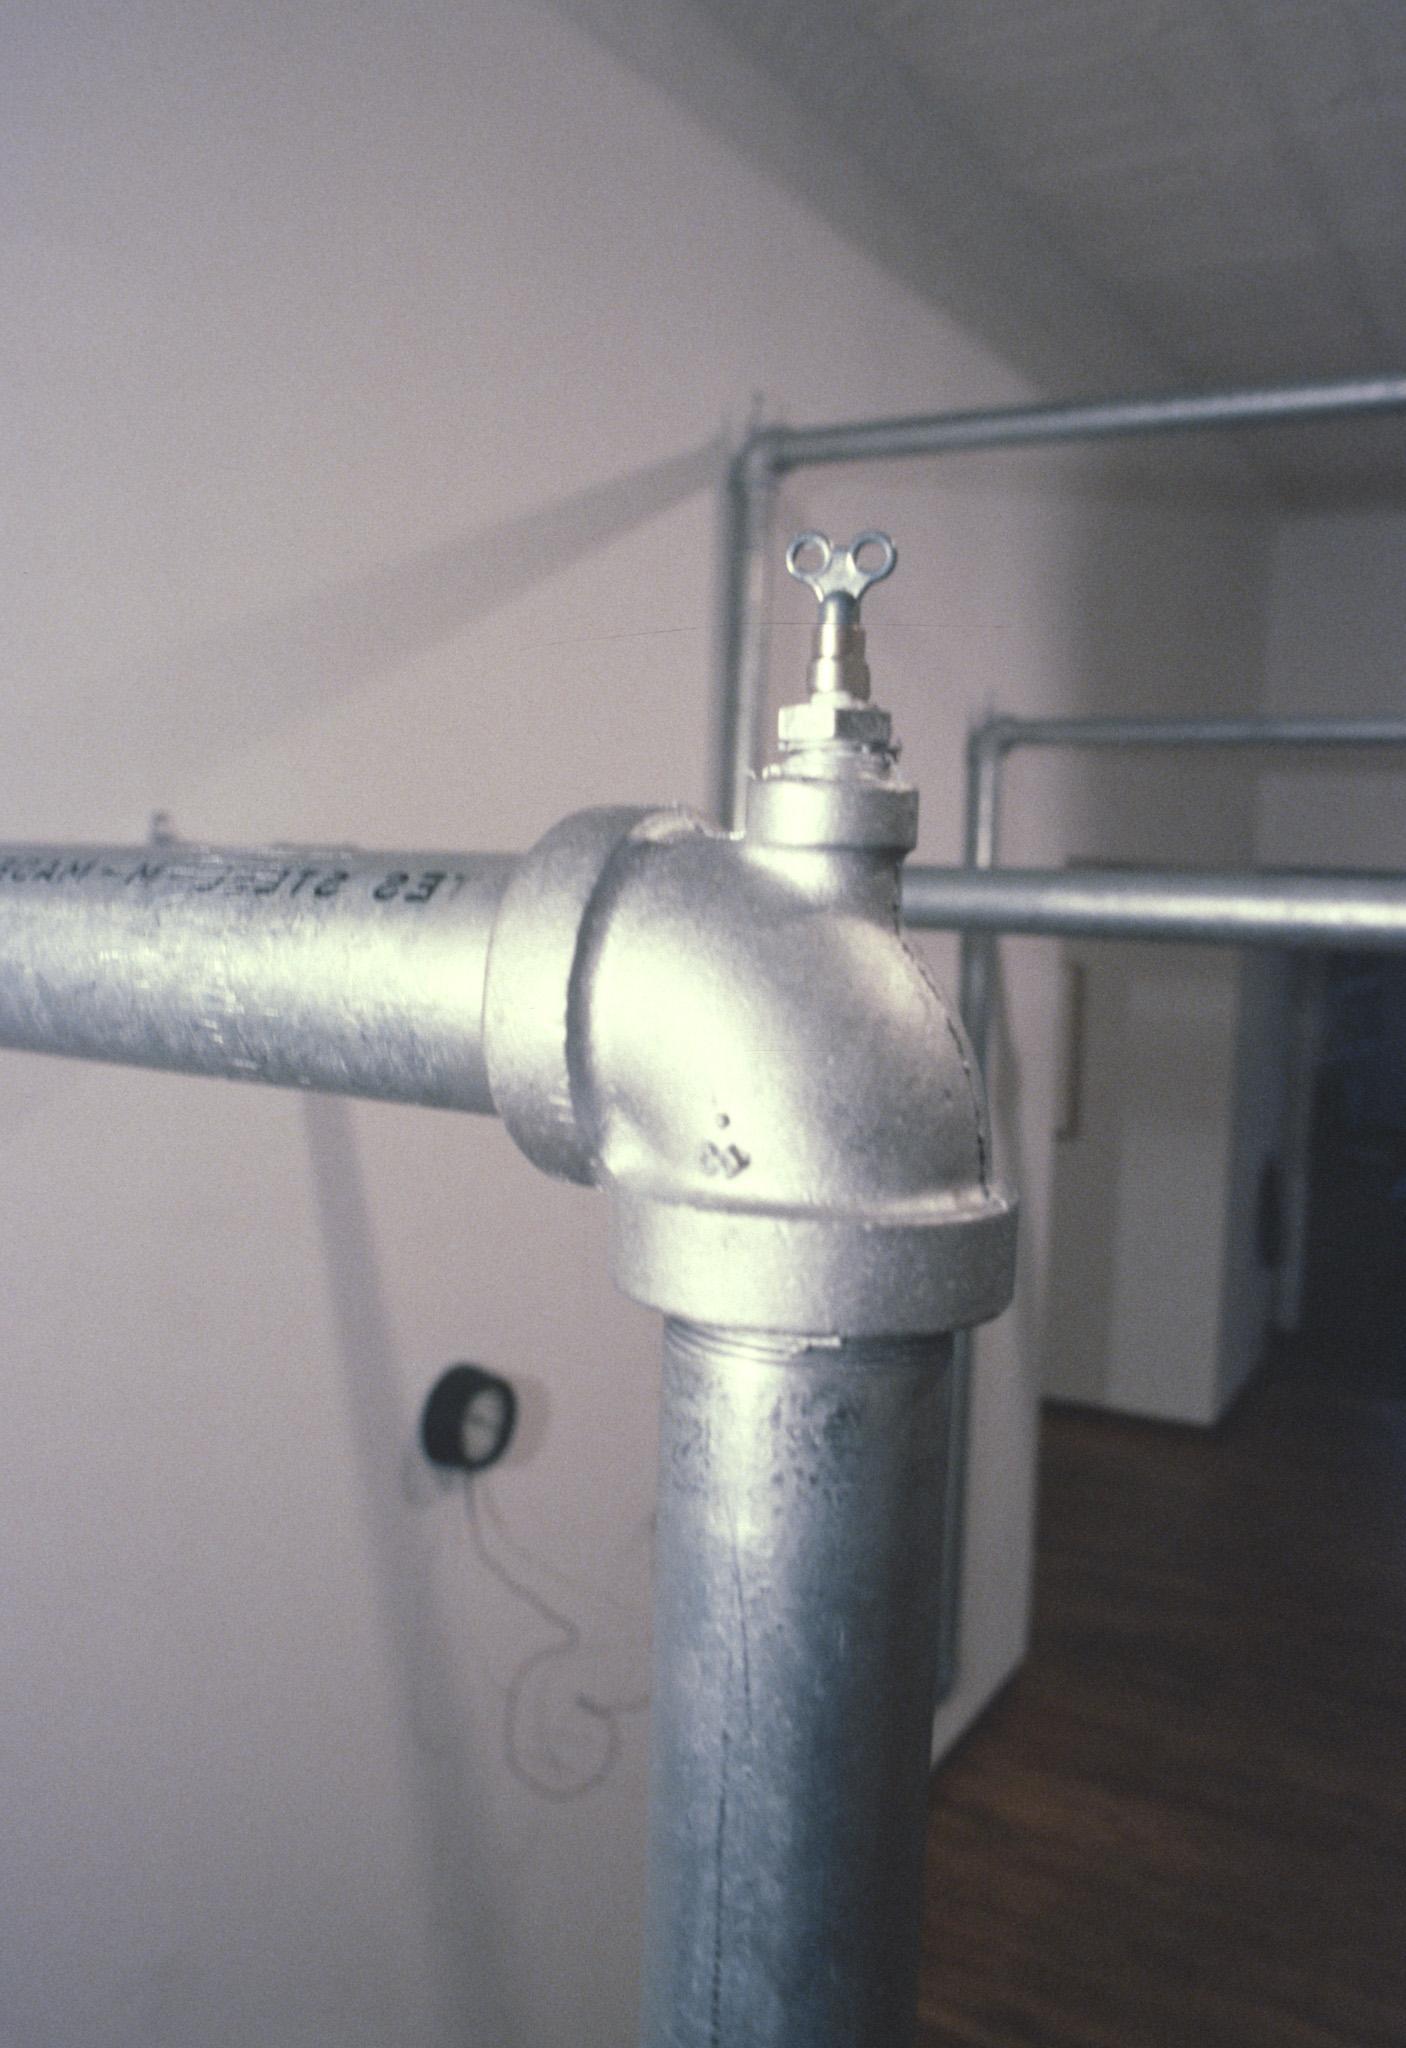 Nancy Holt's sculpture called Hot Water Heat made of hot water pipes in the John Weber Gallery in New York